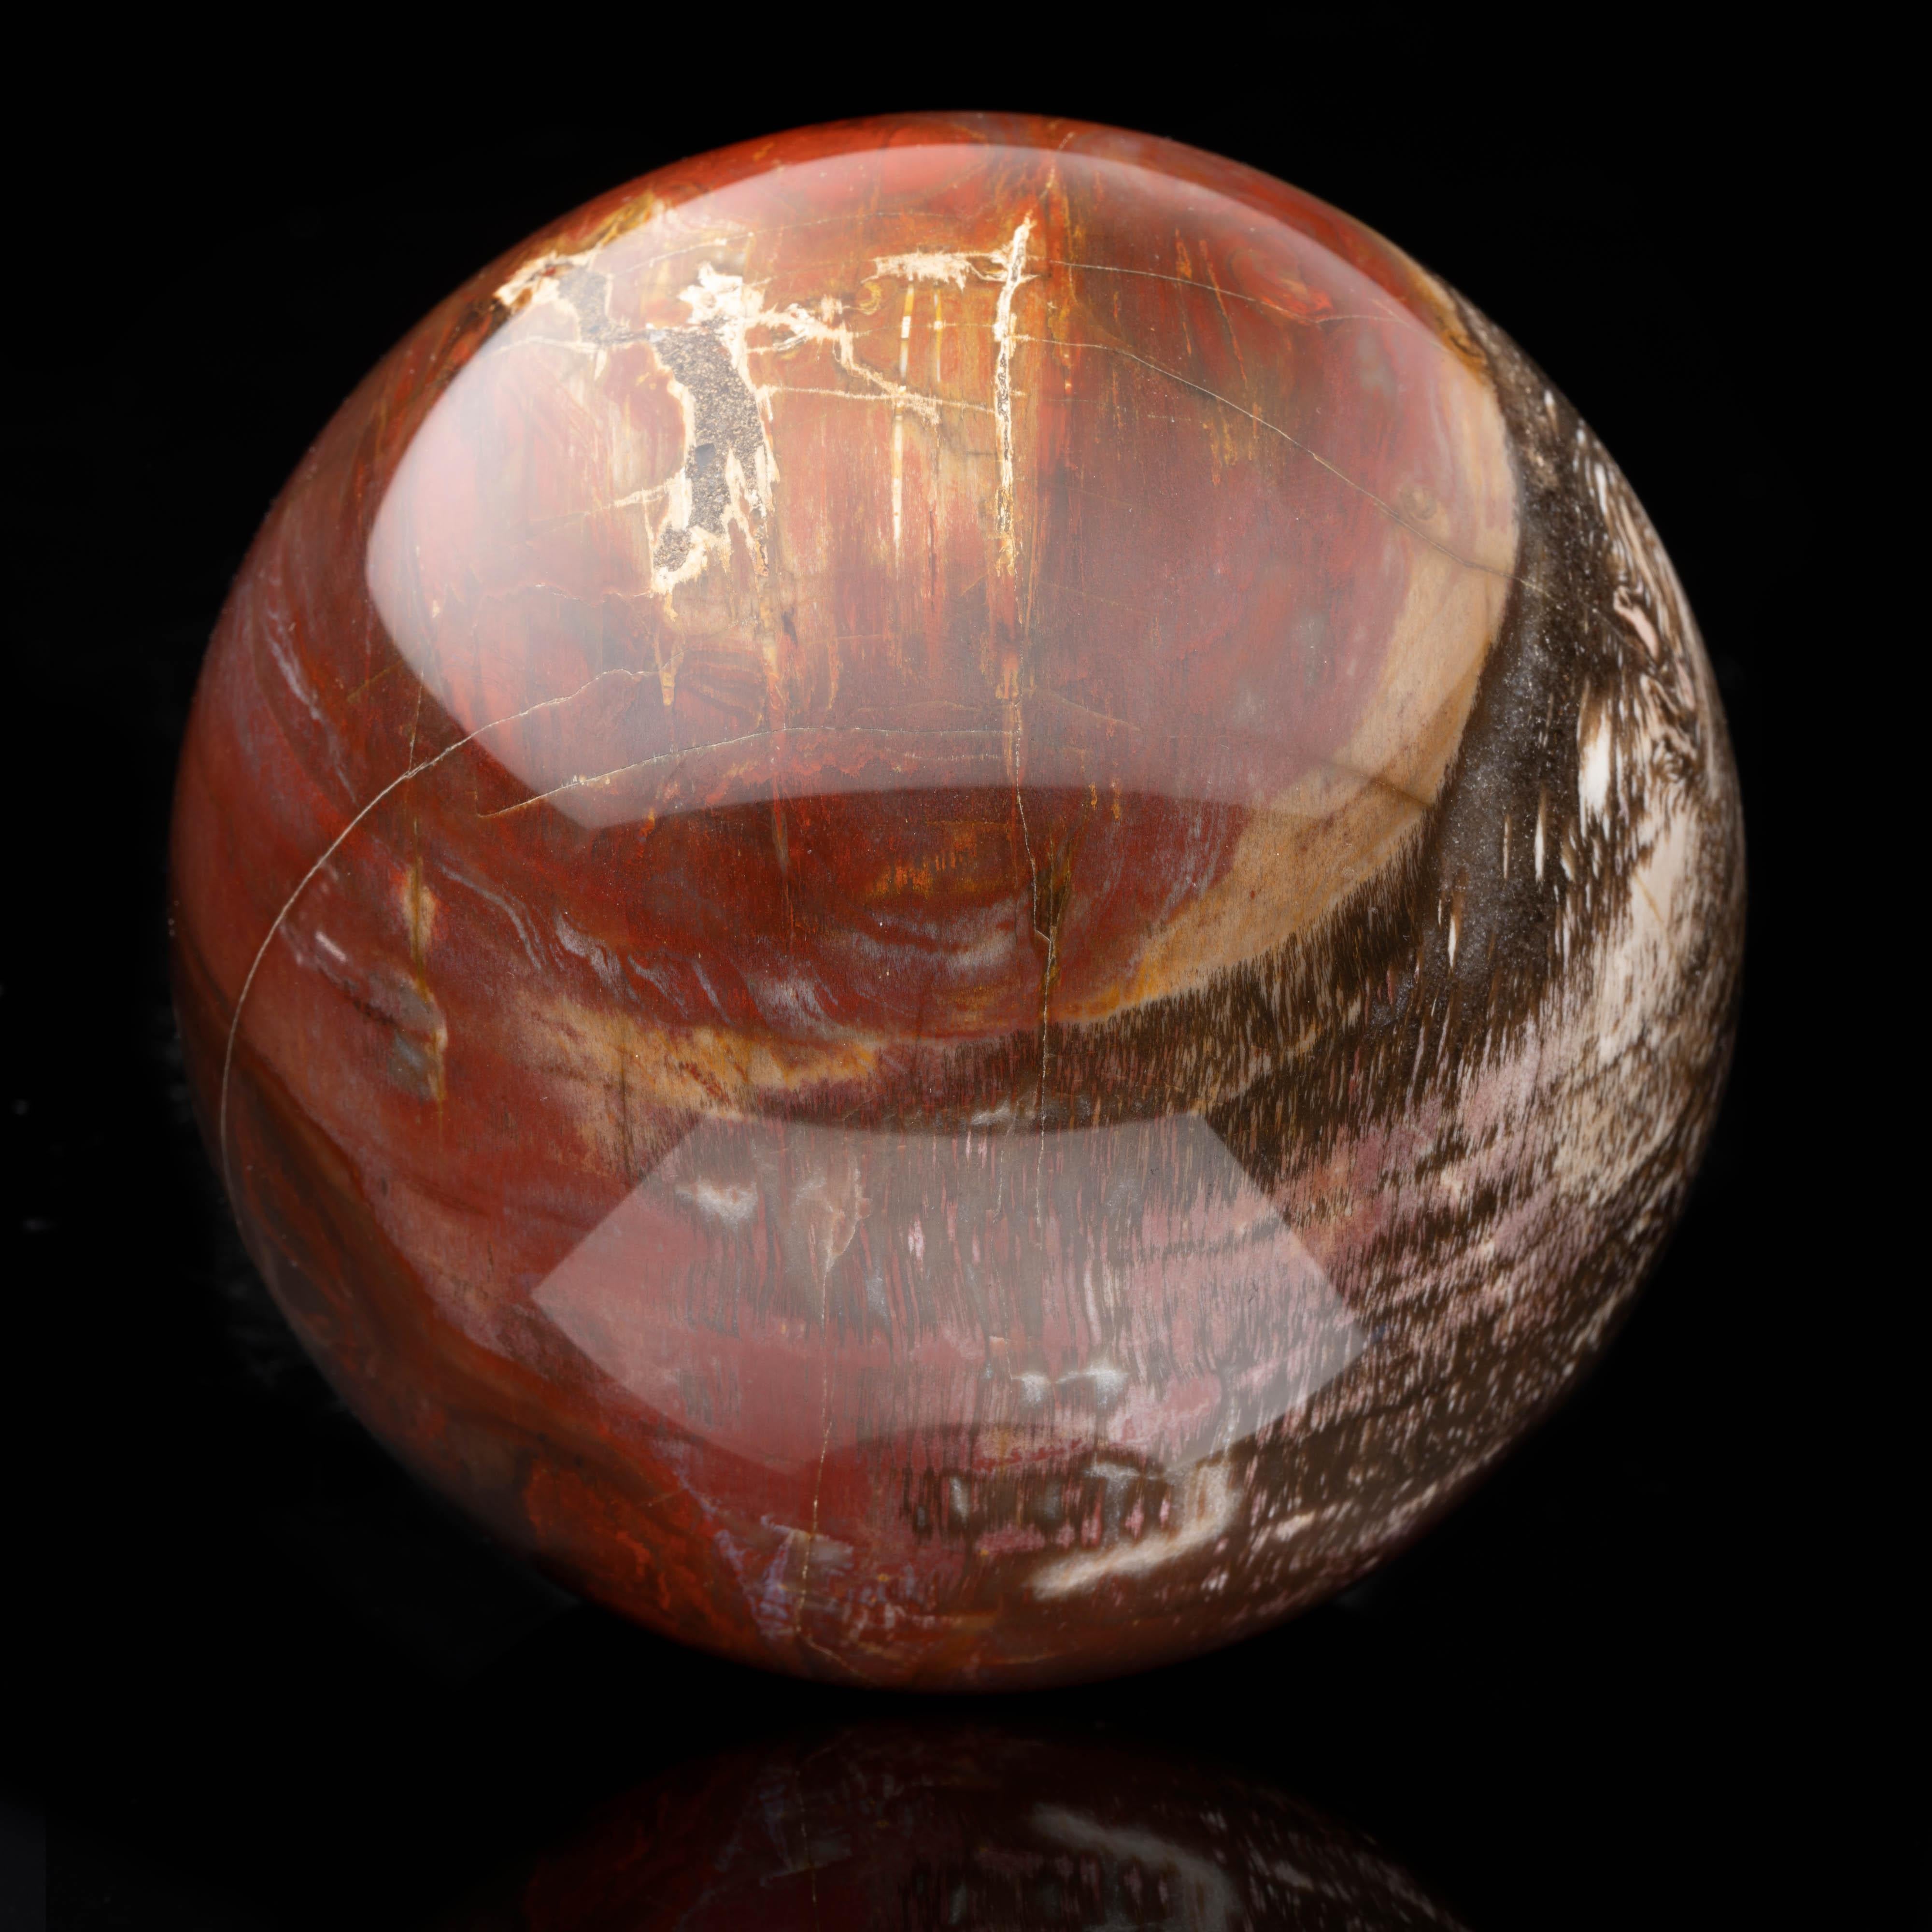 Hand-carved out of one genuine piece of fossilized wood from the famous petrified forests of Arizona, this 3.20-pound over 200 million year-old hand-polished sphere features the rich pigmentation for which this location is known. Featuring